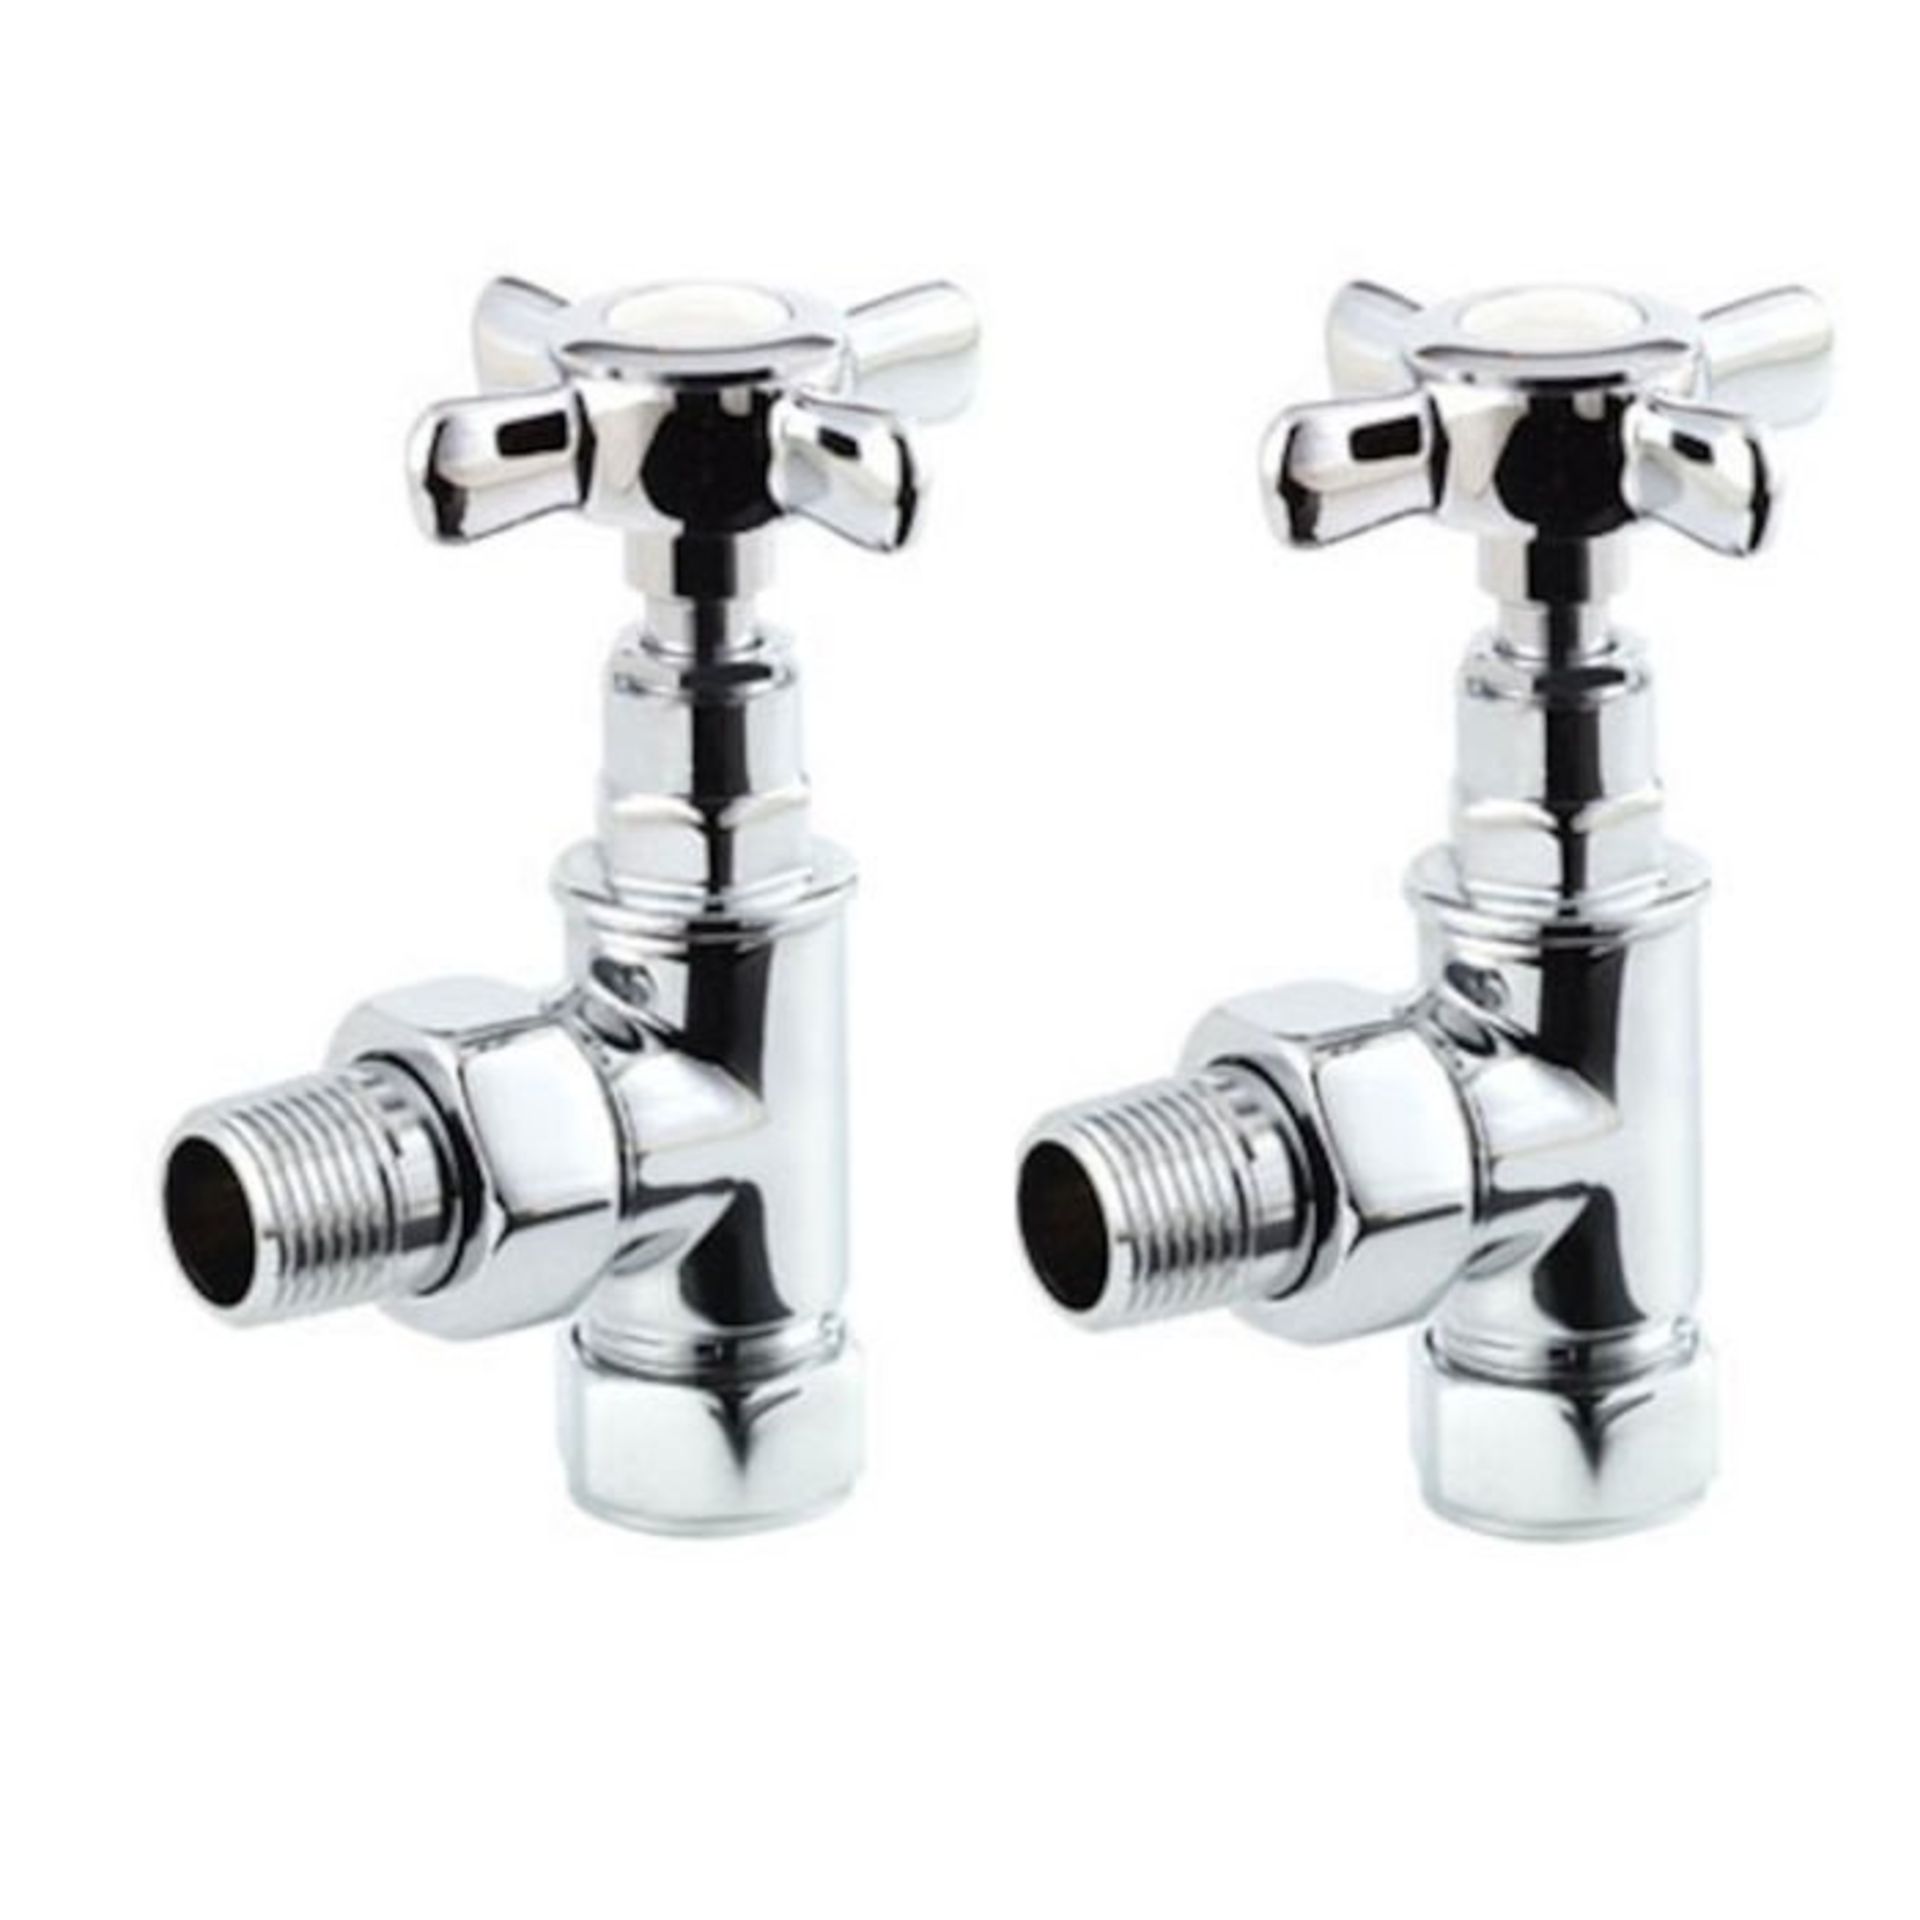 (G147) 15mm Standard Connection Angled Polished Chrome Radiator Valves Chrome Plated Solid Brass